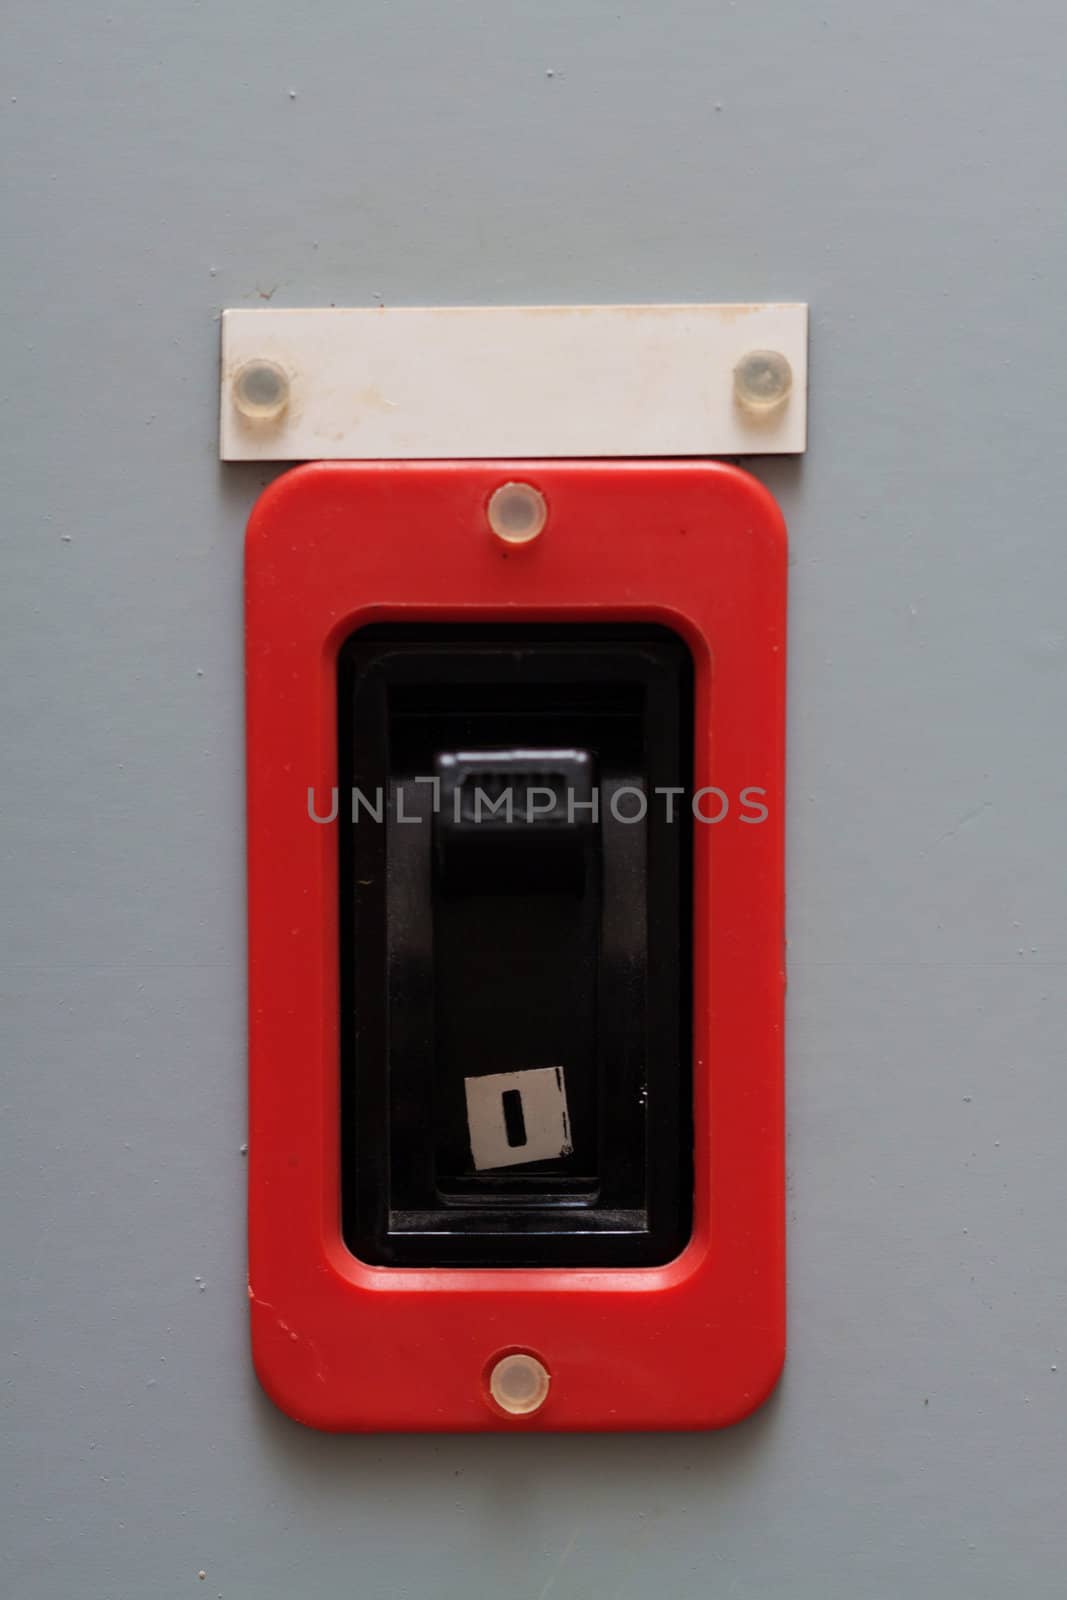 Industrial circuit breaker with a warning sign